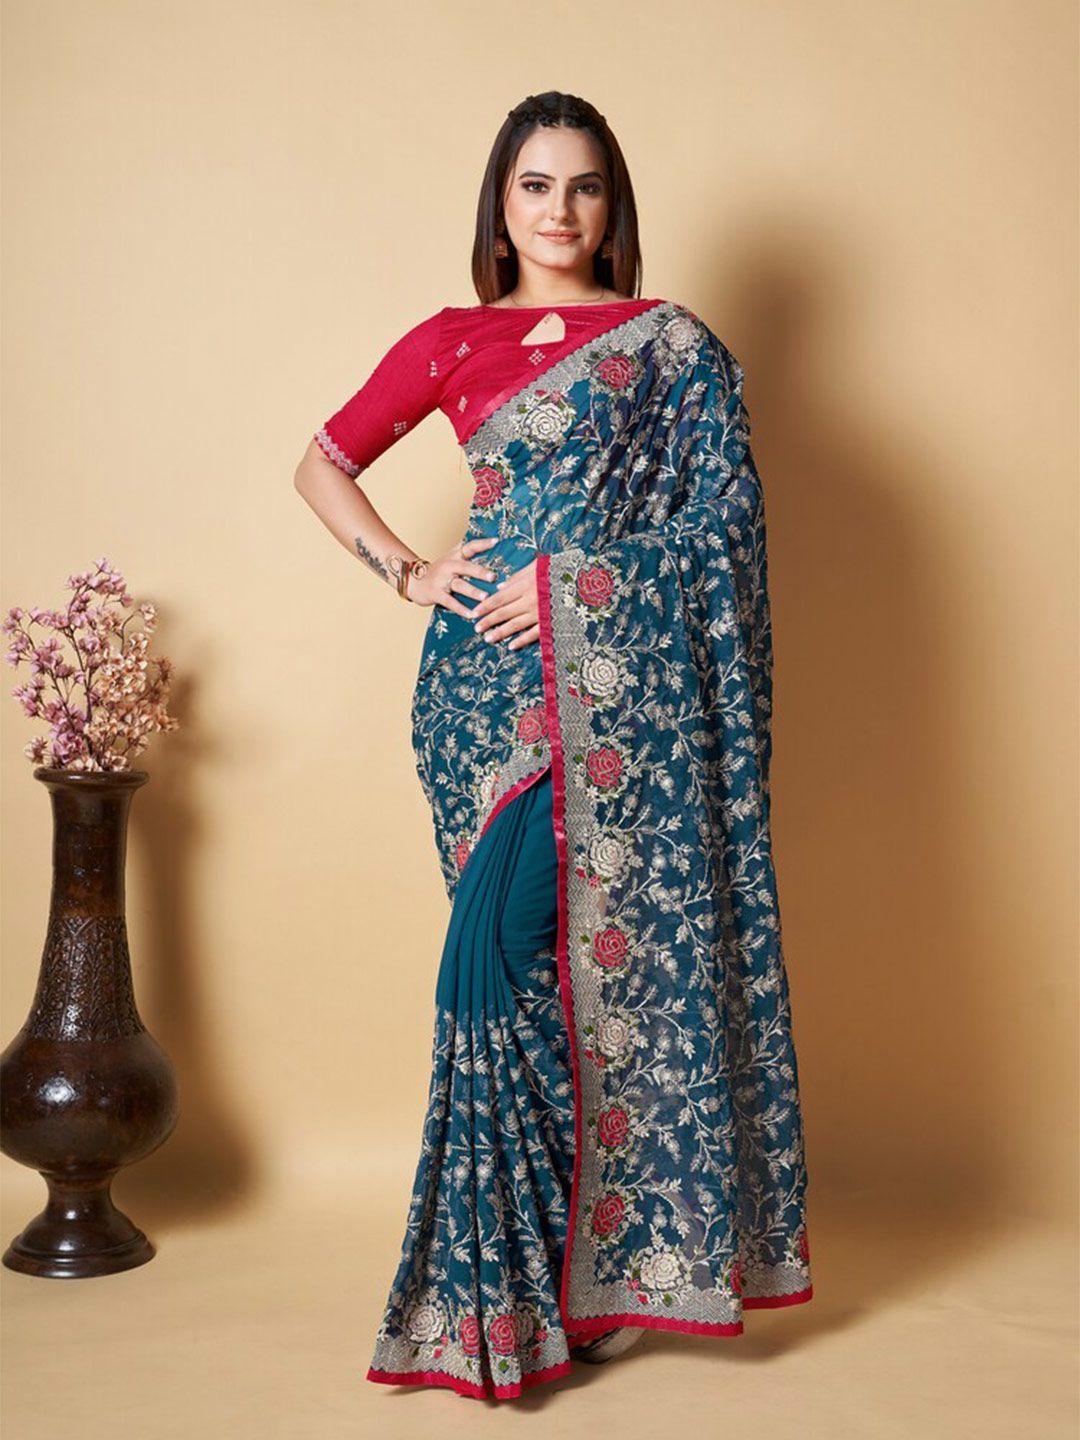 exclusiva floral embroidered saree